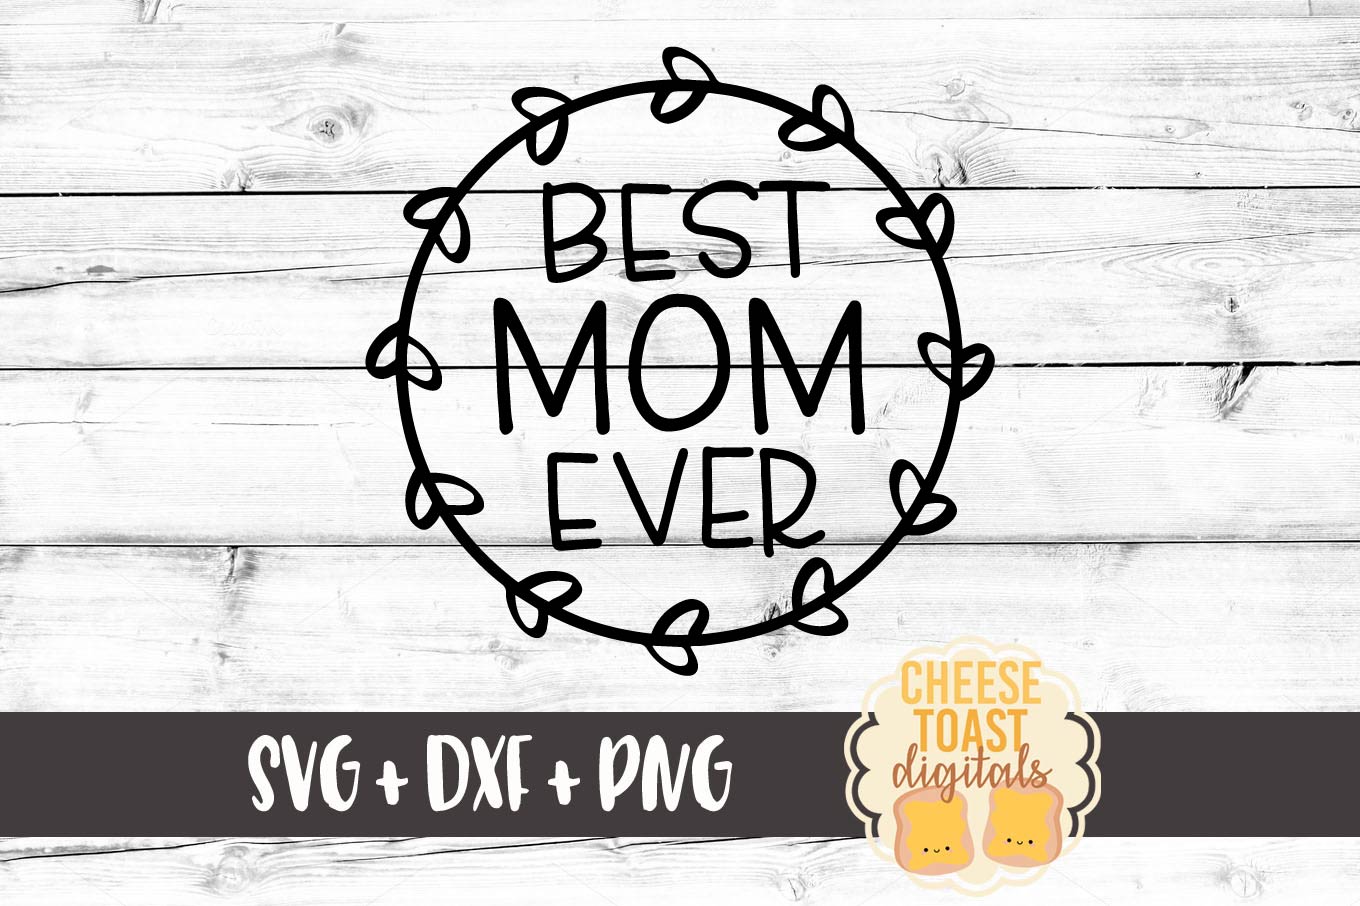 Download Best Mom Ever with Wreath - Mother's Day SVG PNG DXF ...